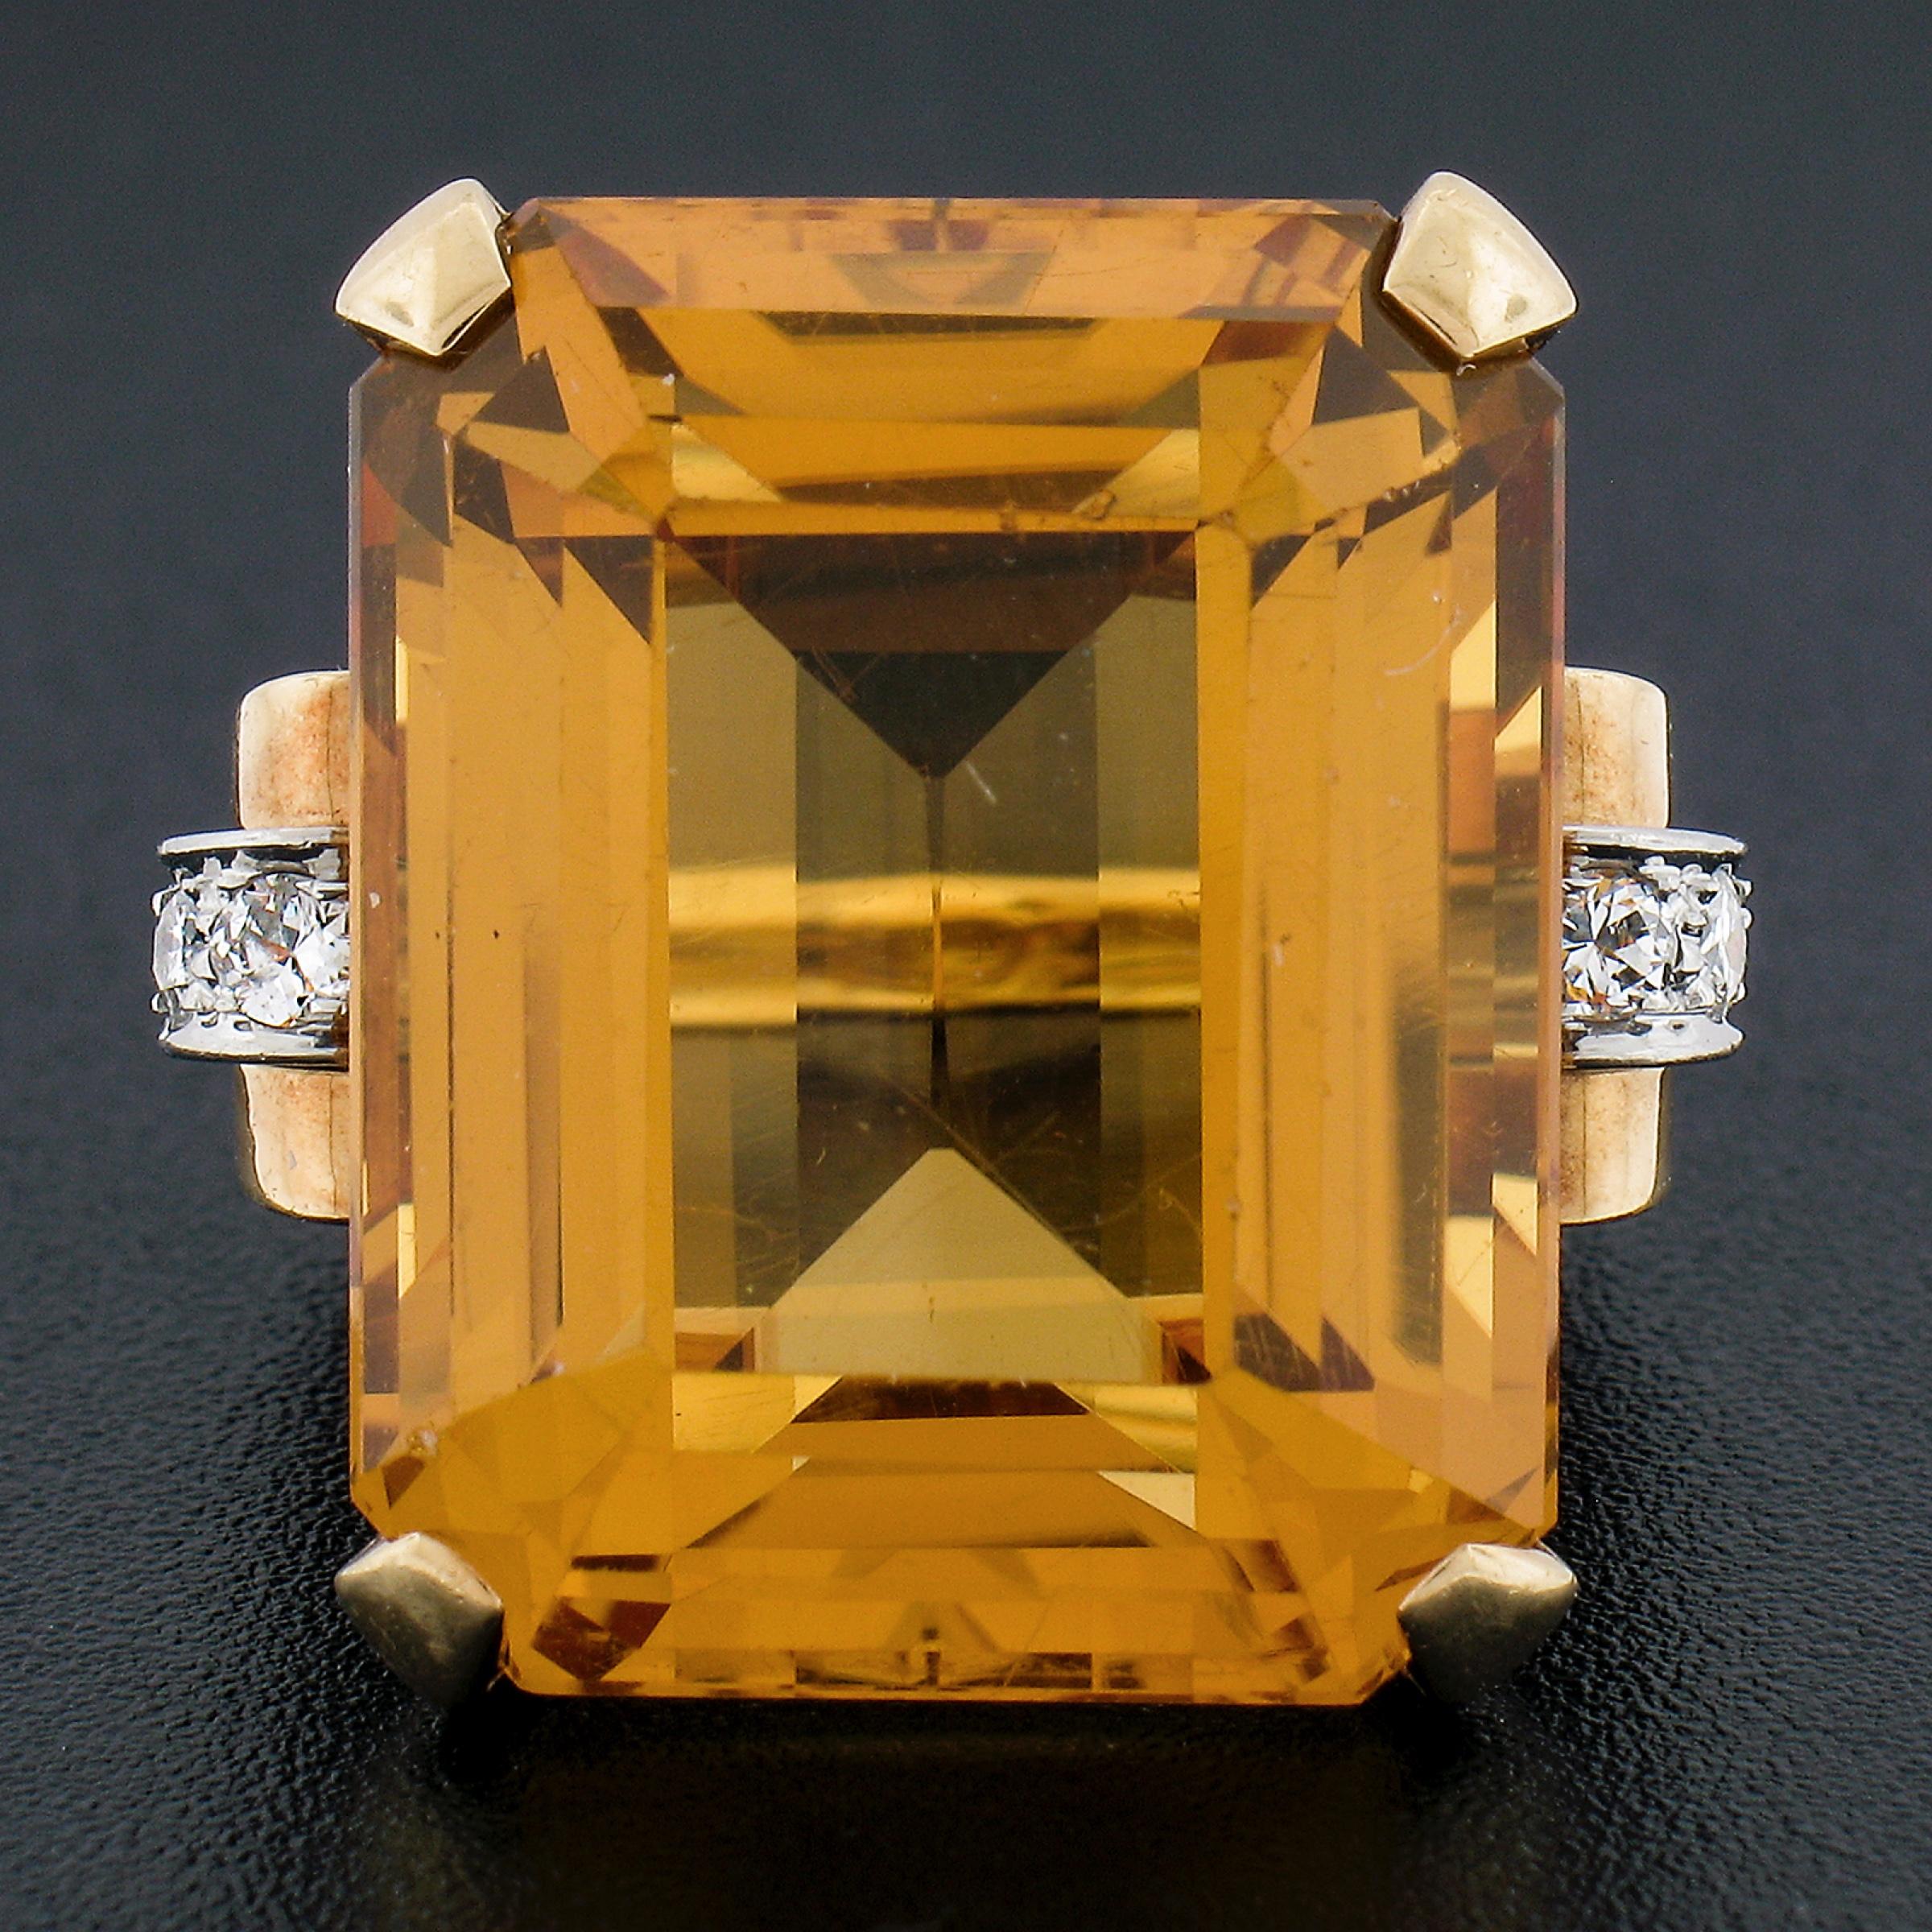 --Stone(s):--
(1) Natural Genuine Citrine - Emerald Cut - Prong Set - Rich yellowish Orange Color - 12.25x17.15x12.09mm - 31.15ct (approx.)
(6) Natural Genuine Diamonds - Old Transitional Cut - Pave Set - F/G Color - VS1/VS2 Clarity - 0.18ct